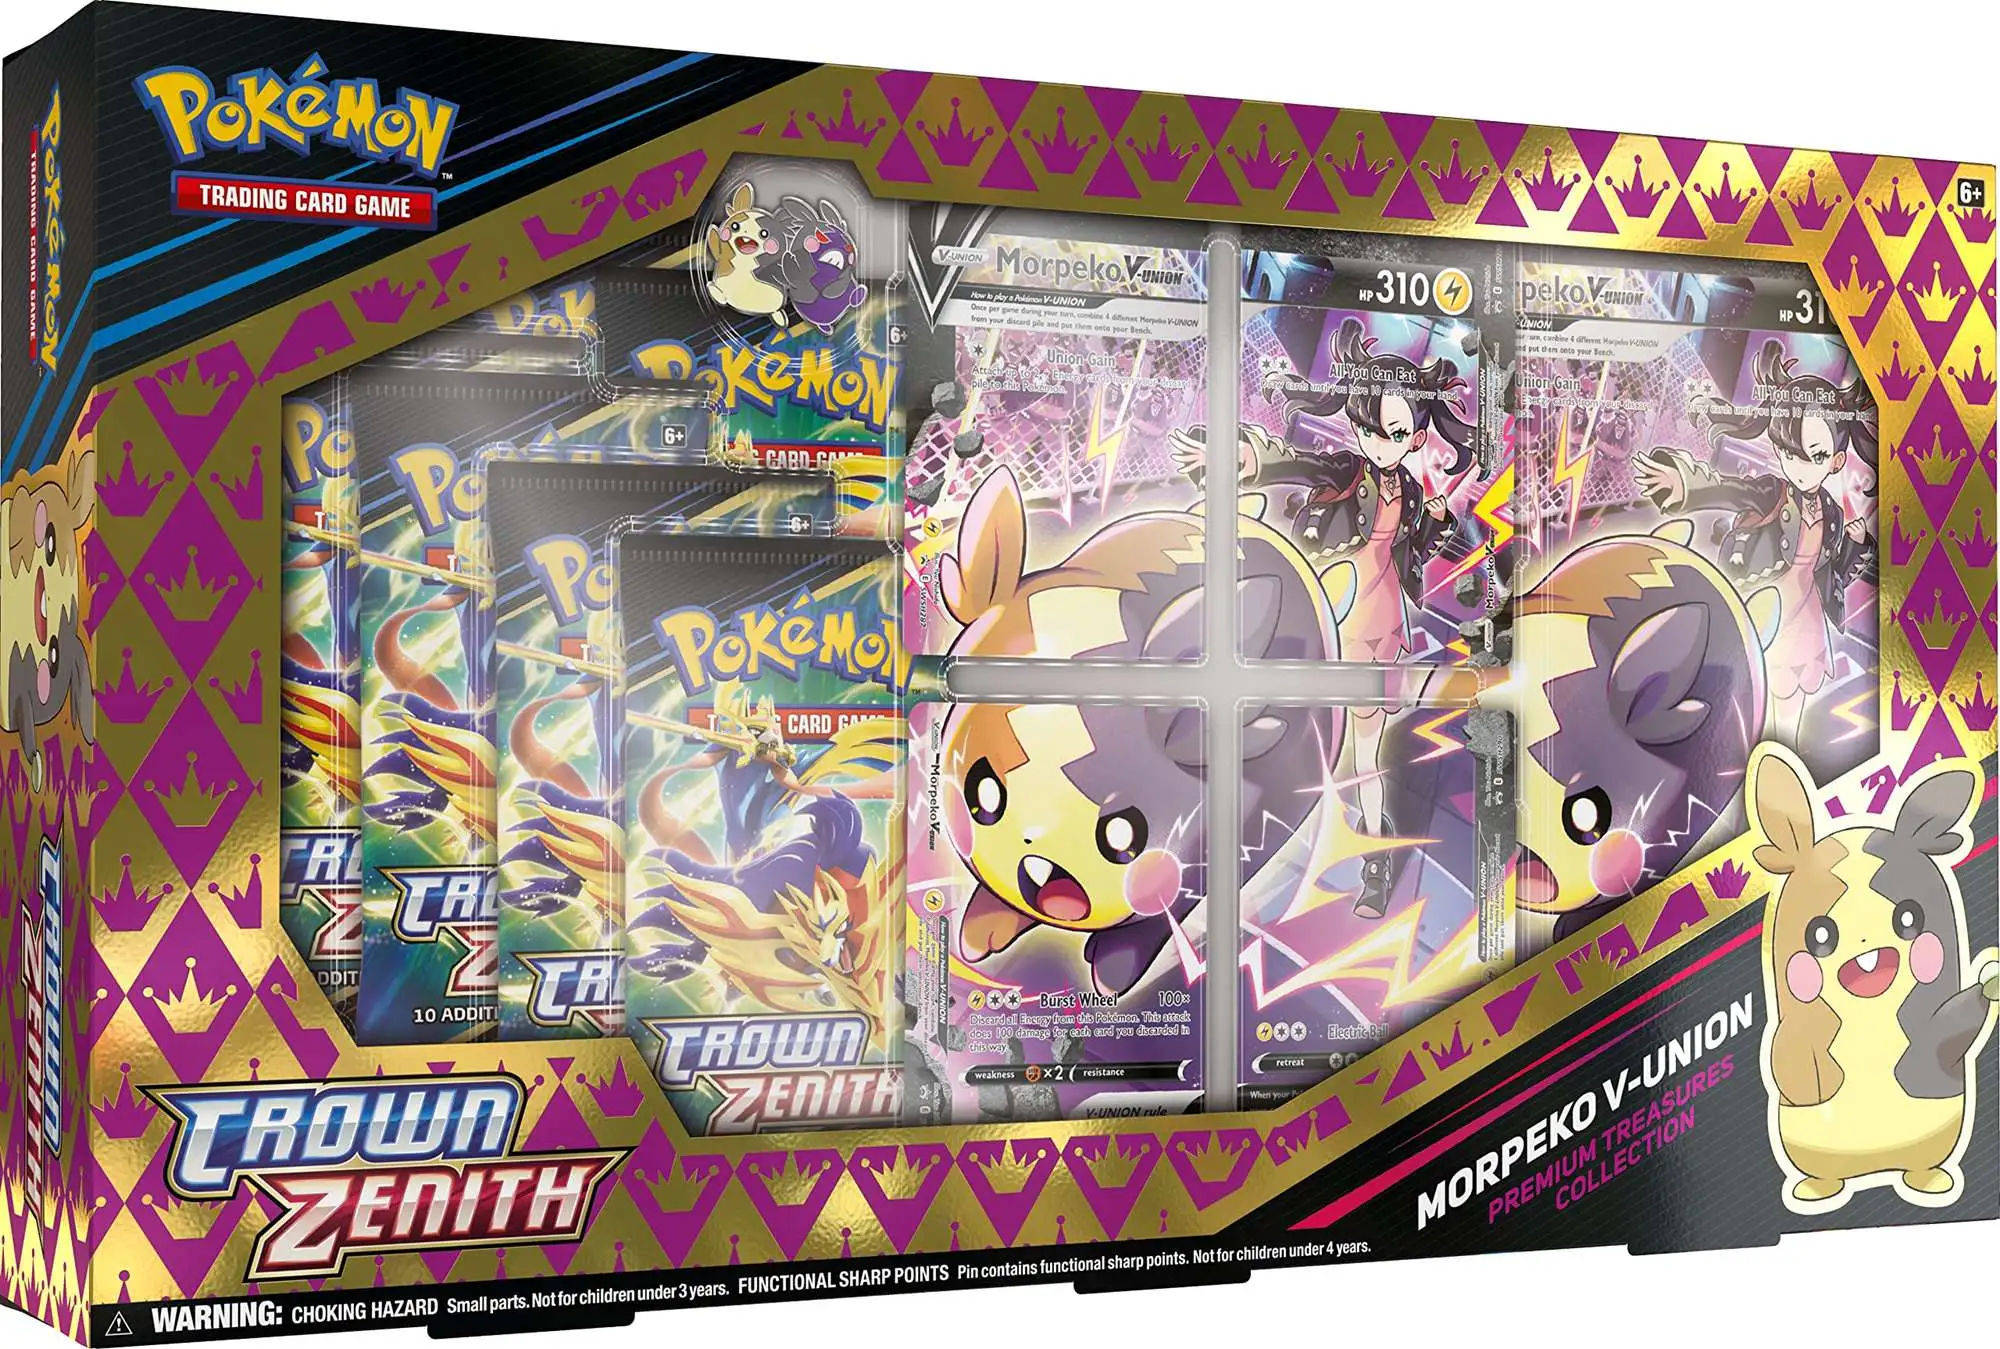 Pokemon Trading Card Game Crown Zenith Morpeko V-Union Premium Treasures  Collection Box [5 Booster Packs, 4 Etched Promo Cards, Oversize & More]